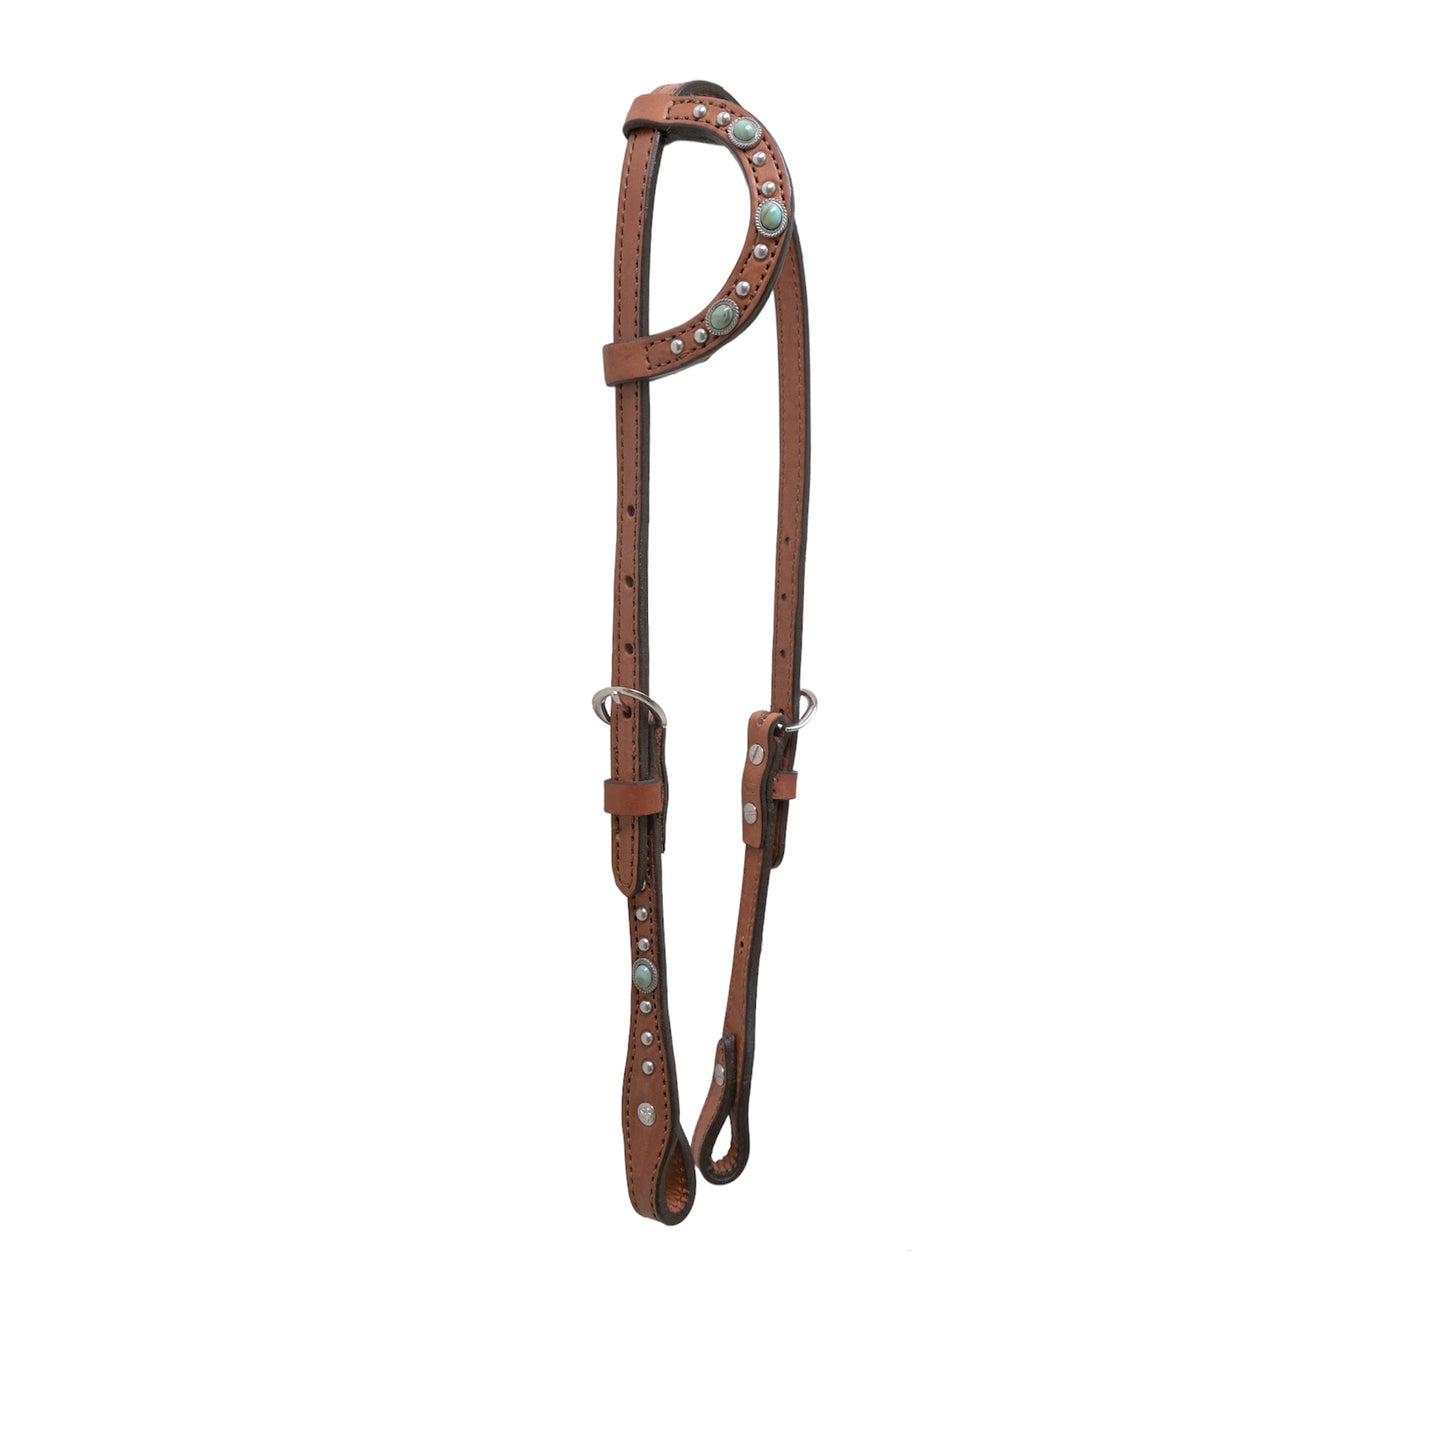 5/8" Flat one ear headstall rough out toast leather with turquoise stones and SS spots.